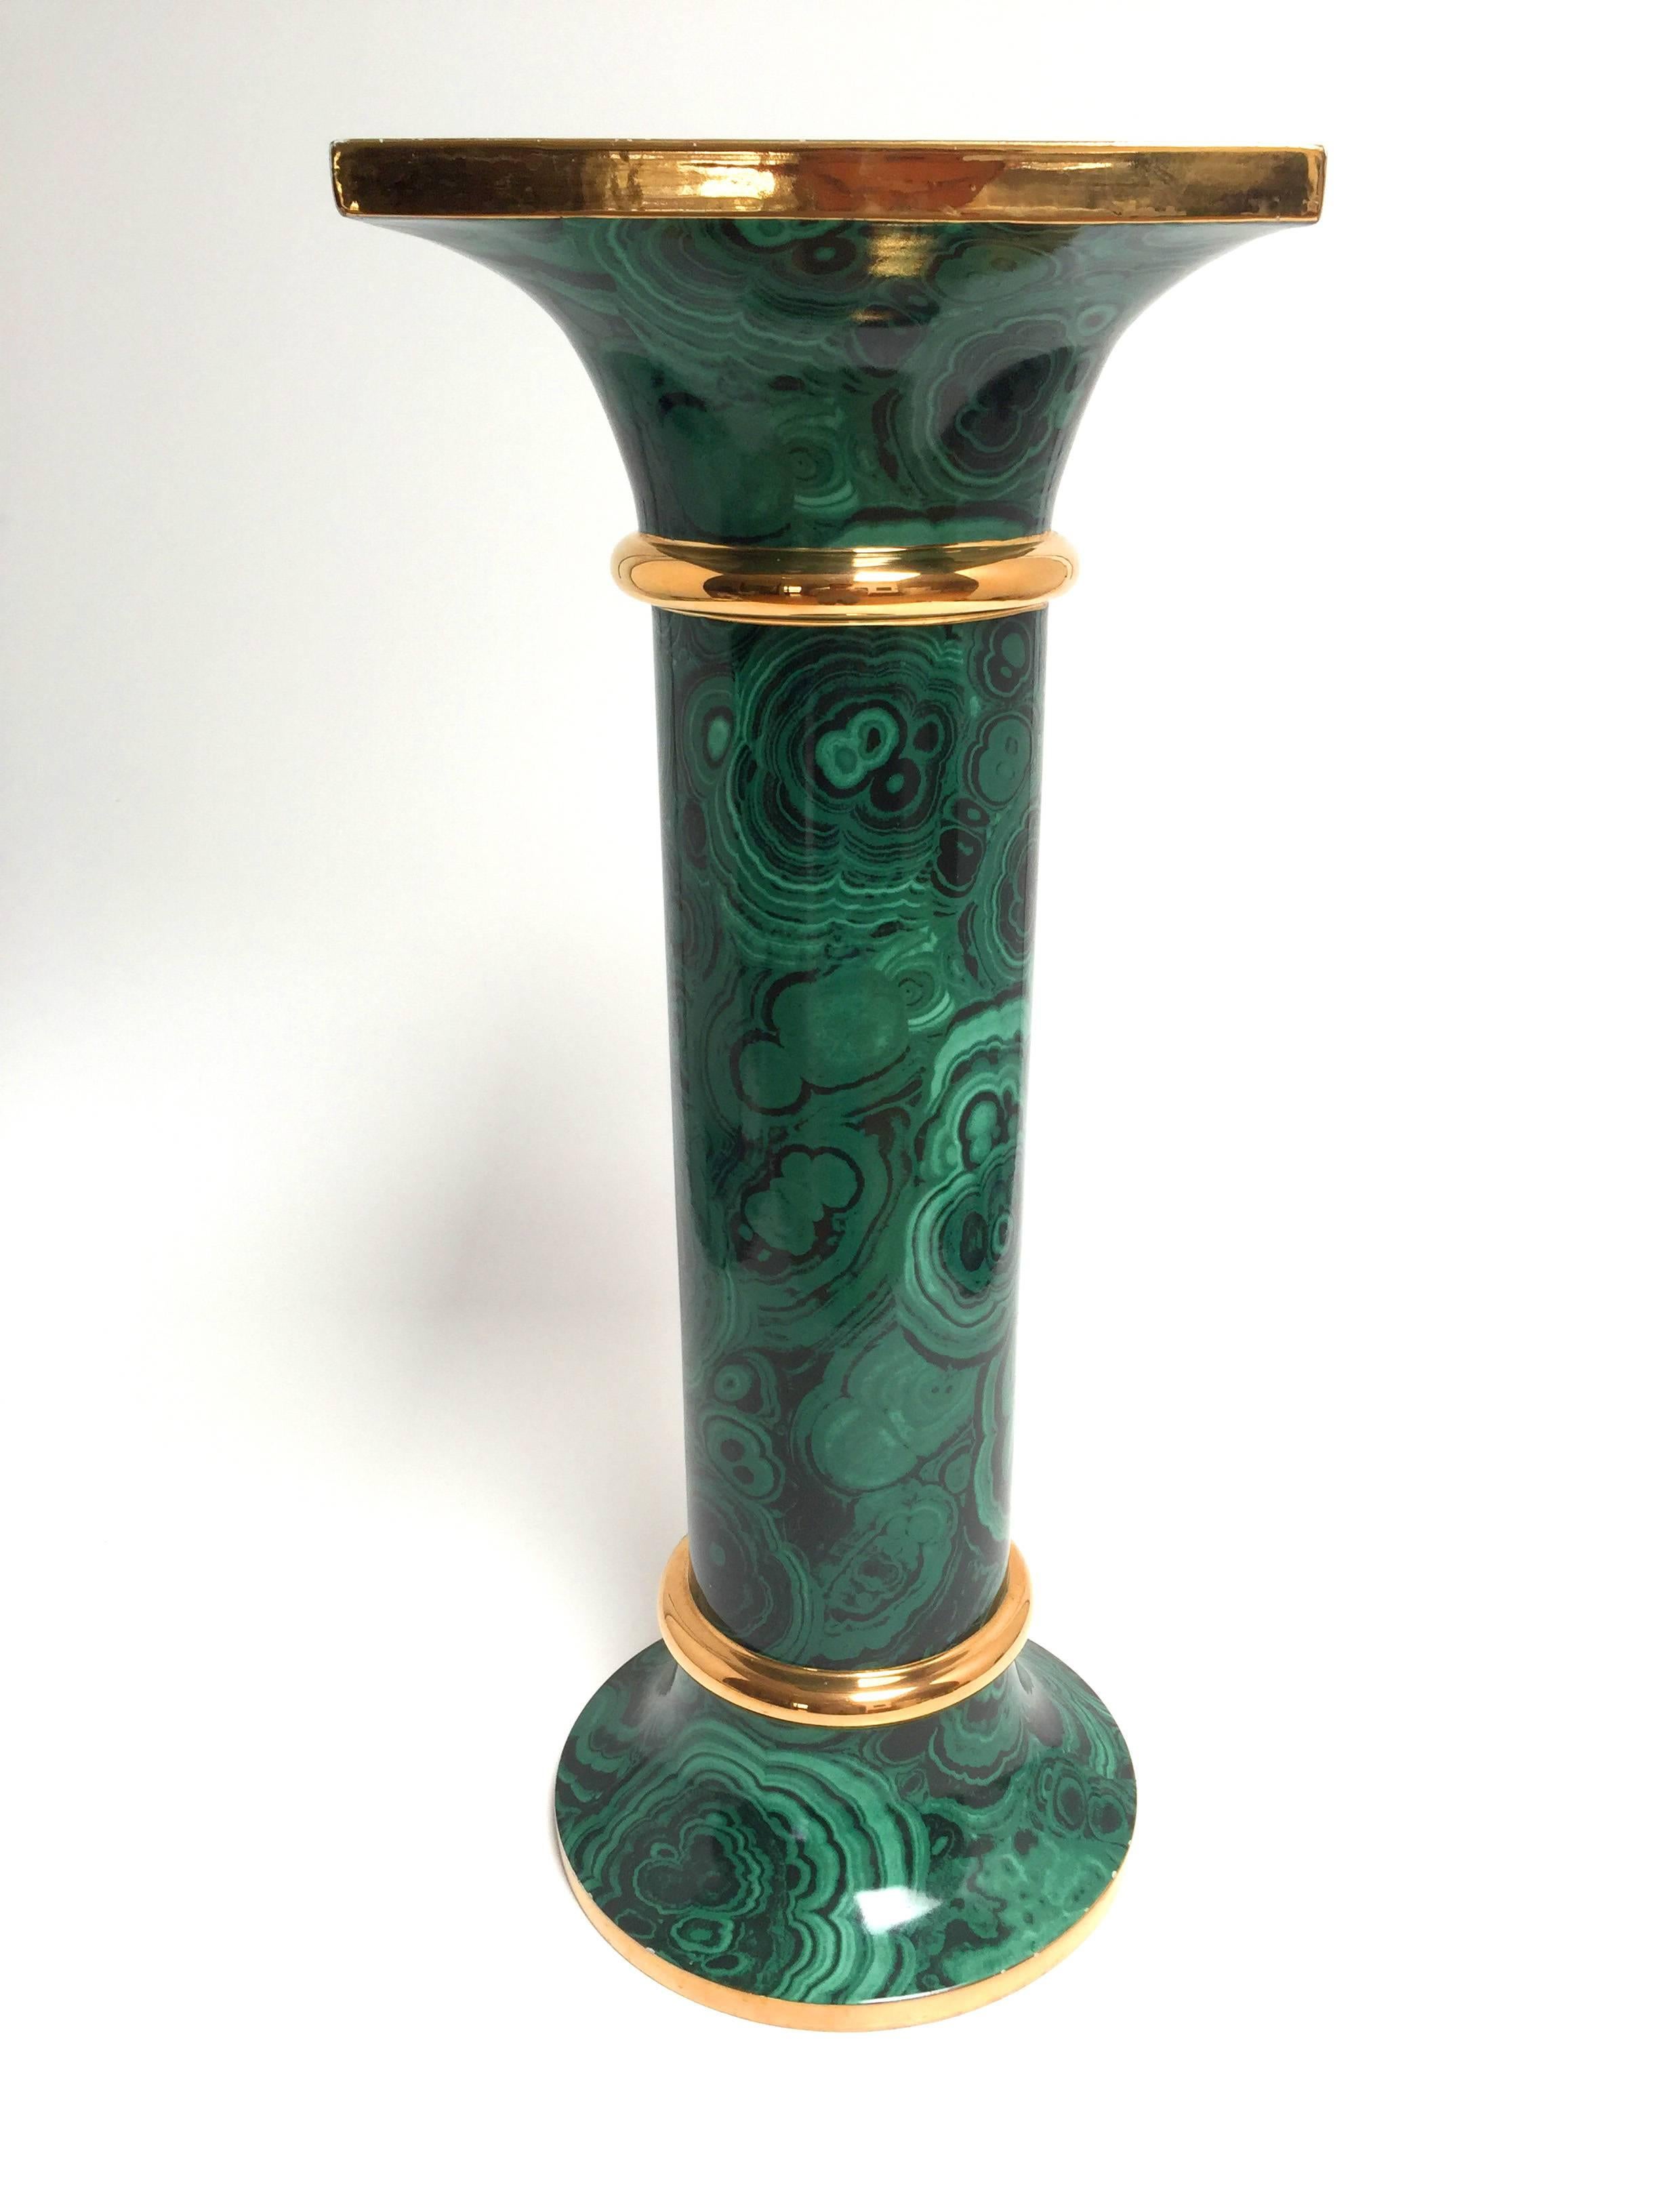 Reminiscent of Piero Fornasetti's style, this Italian pedestal features a transfer-printed malachite design on a ceramic body, with gilt edges. 1950s.

Underside stamped with Made in Italy.